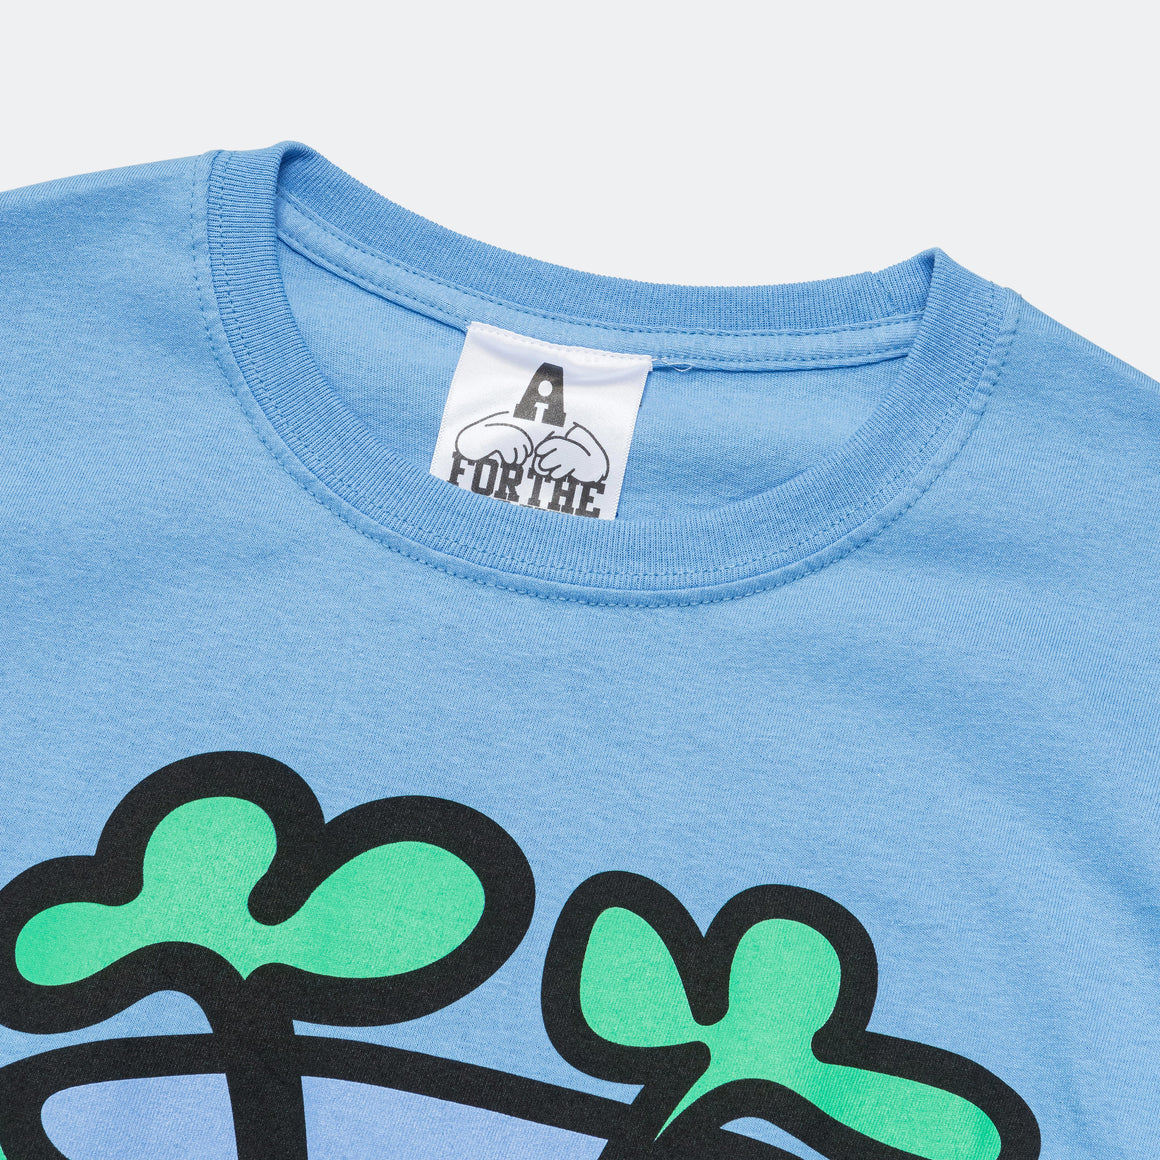 For The Homies - Pothead T-Shirt - Light Blue - UP THERE